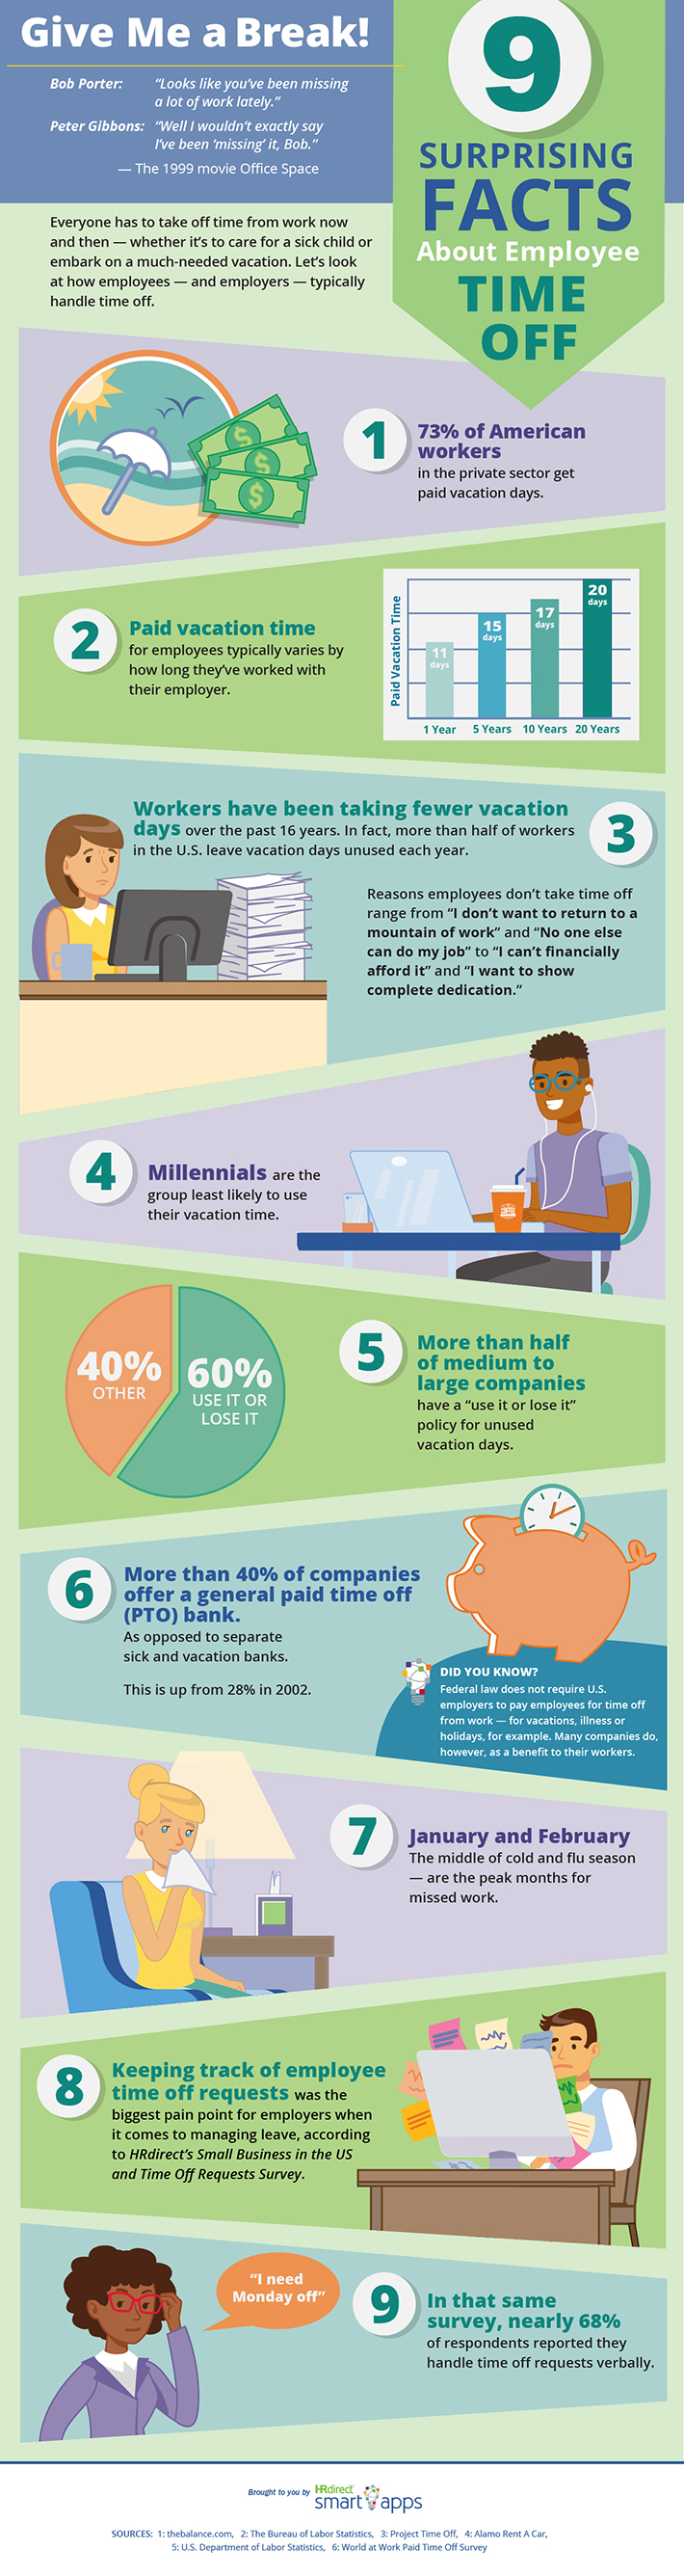 Facts About Employee Time Off